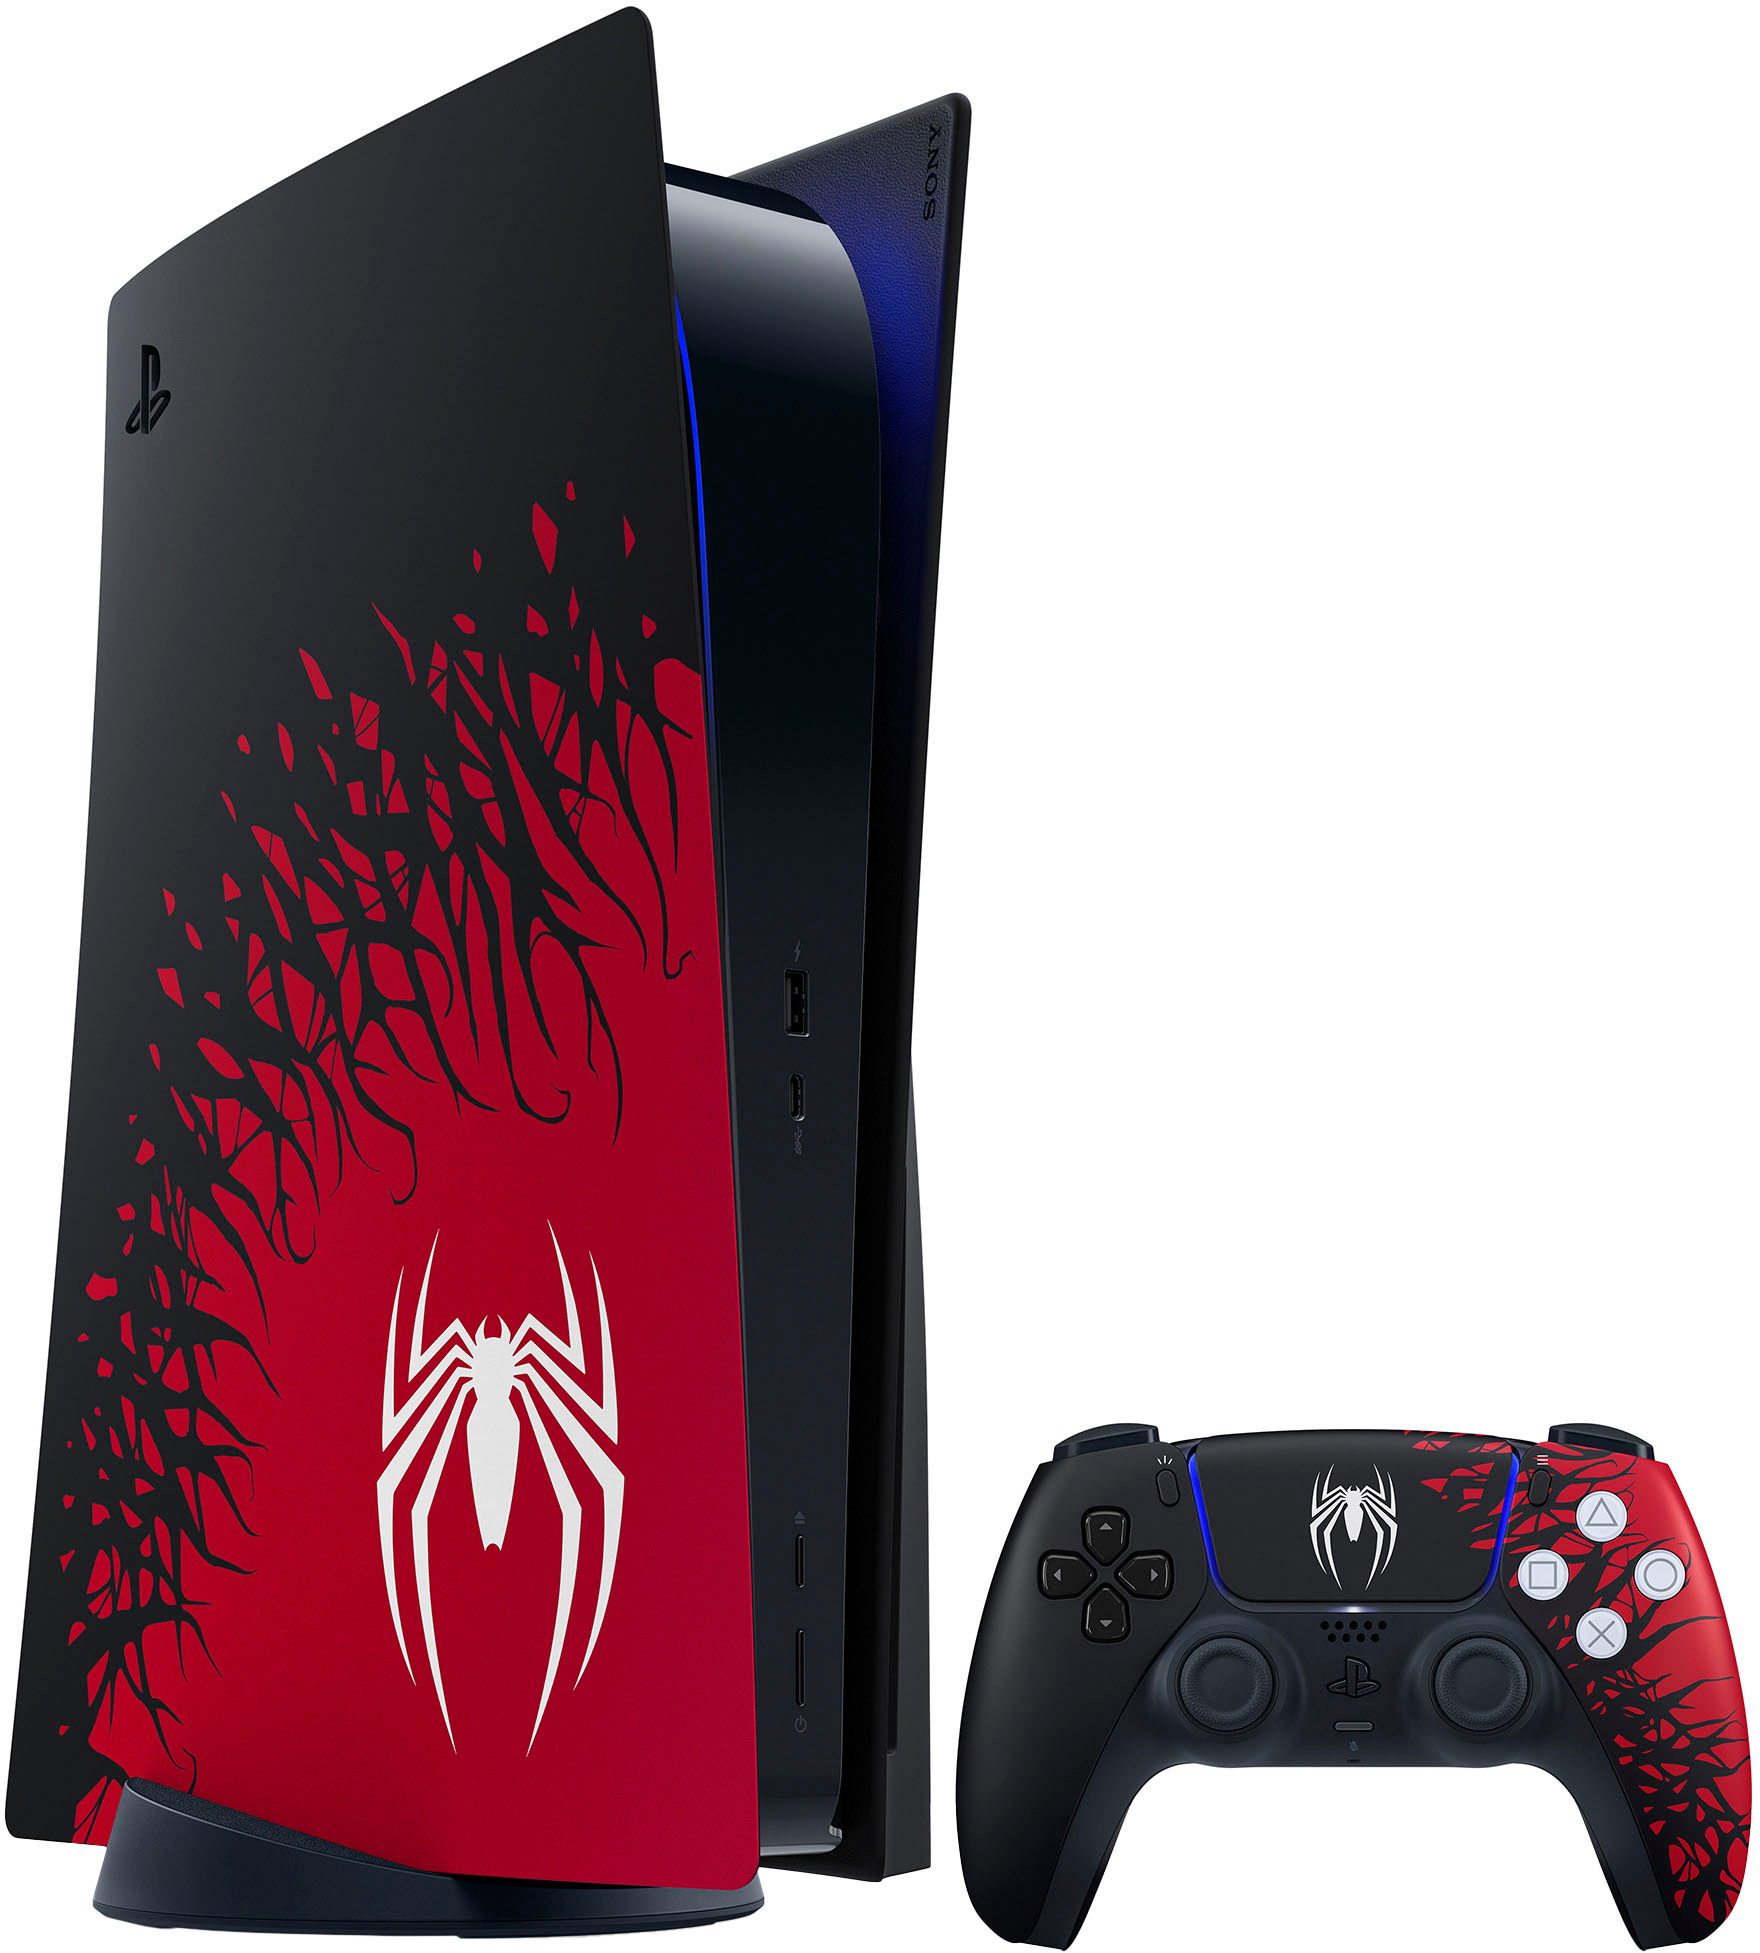 Buy Marvel's Spider-Man 2 Collector's Edition – PS5